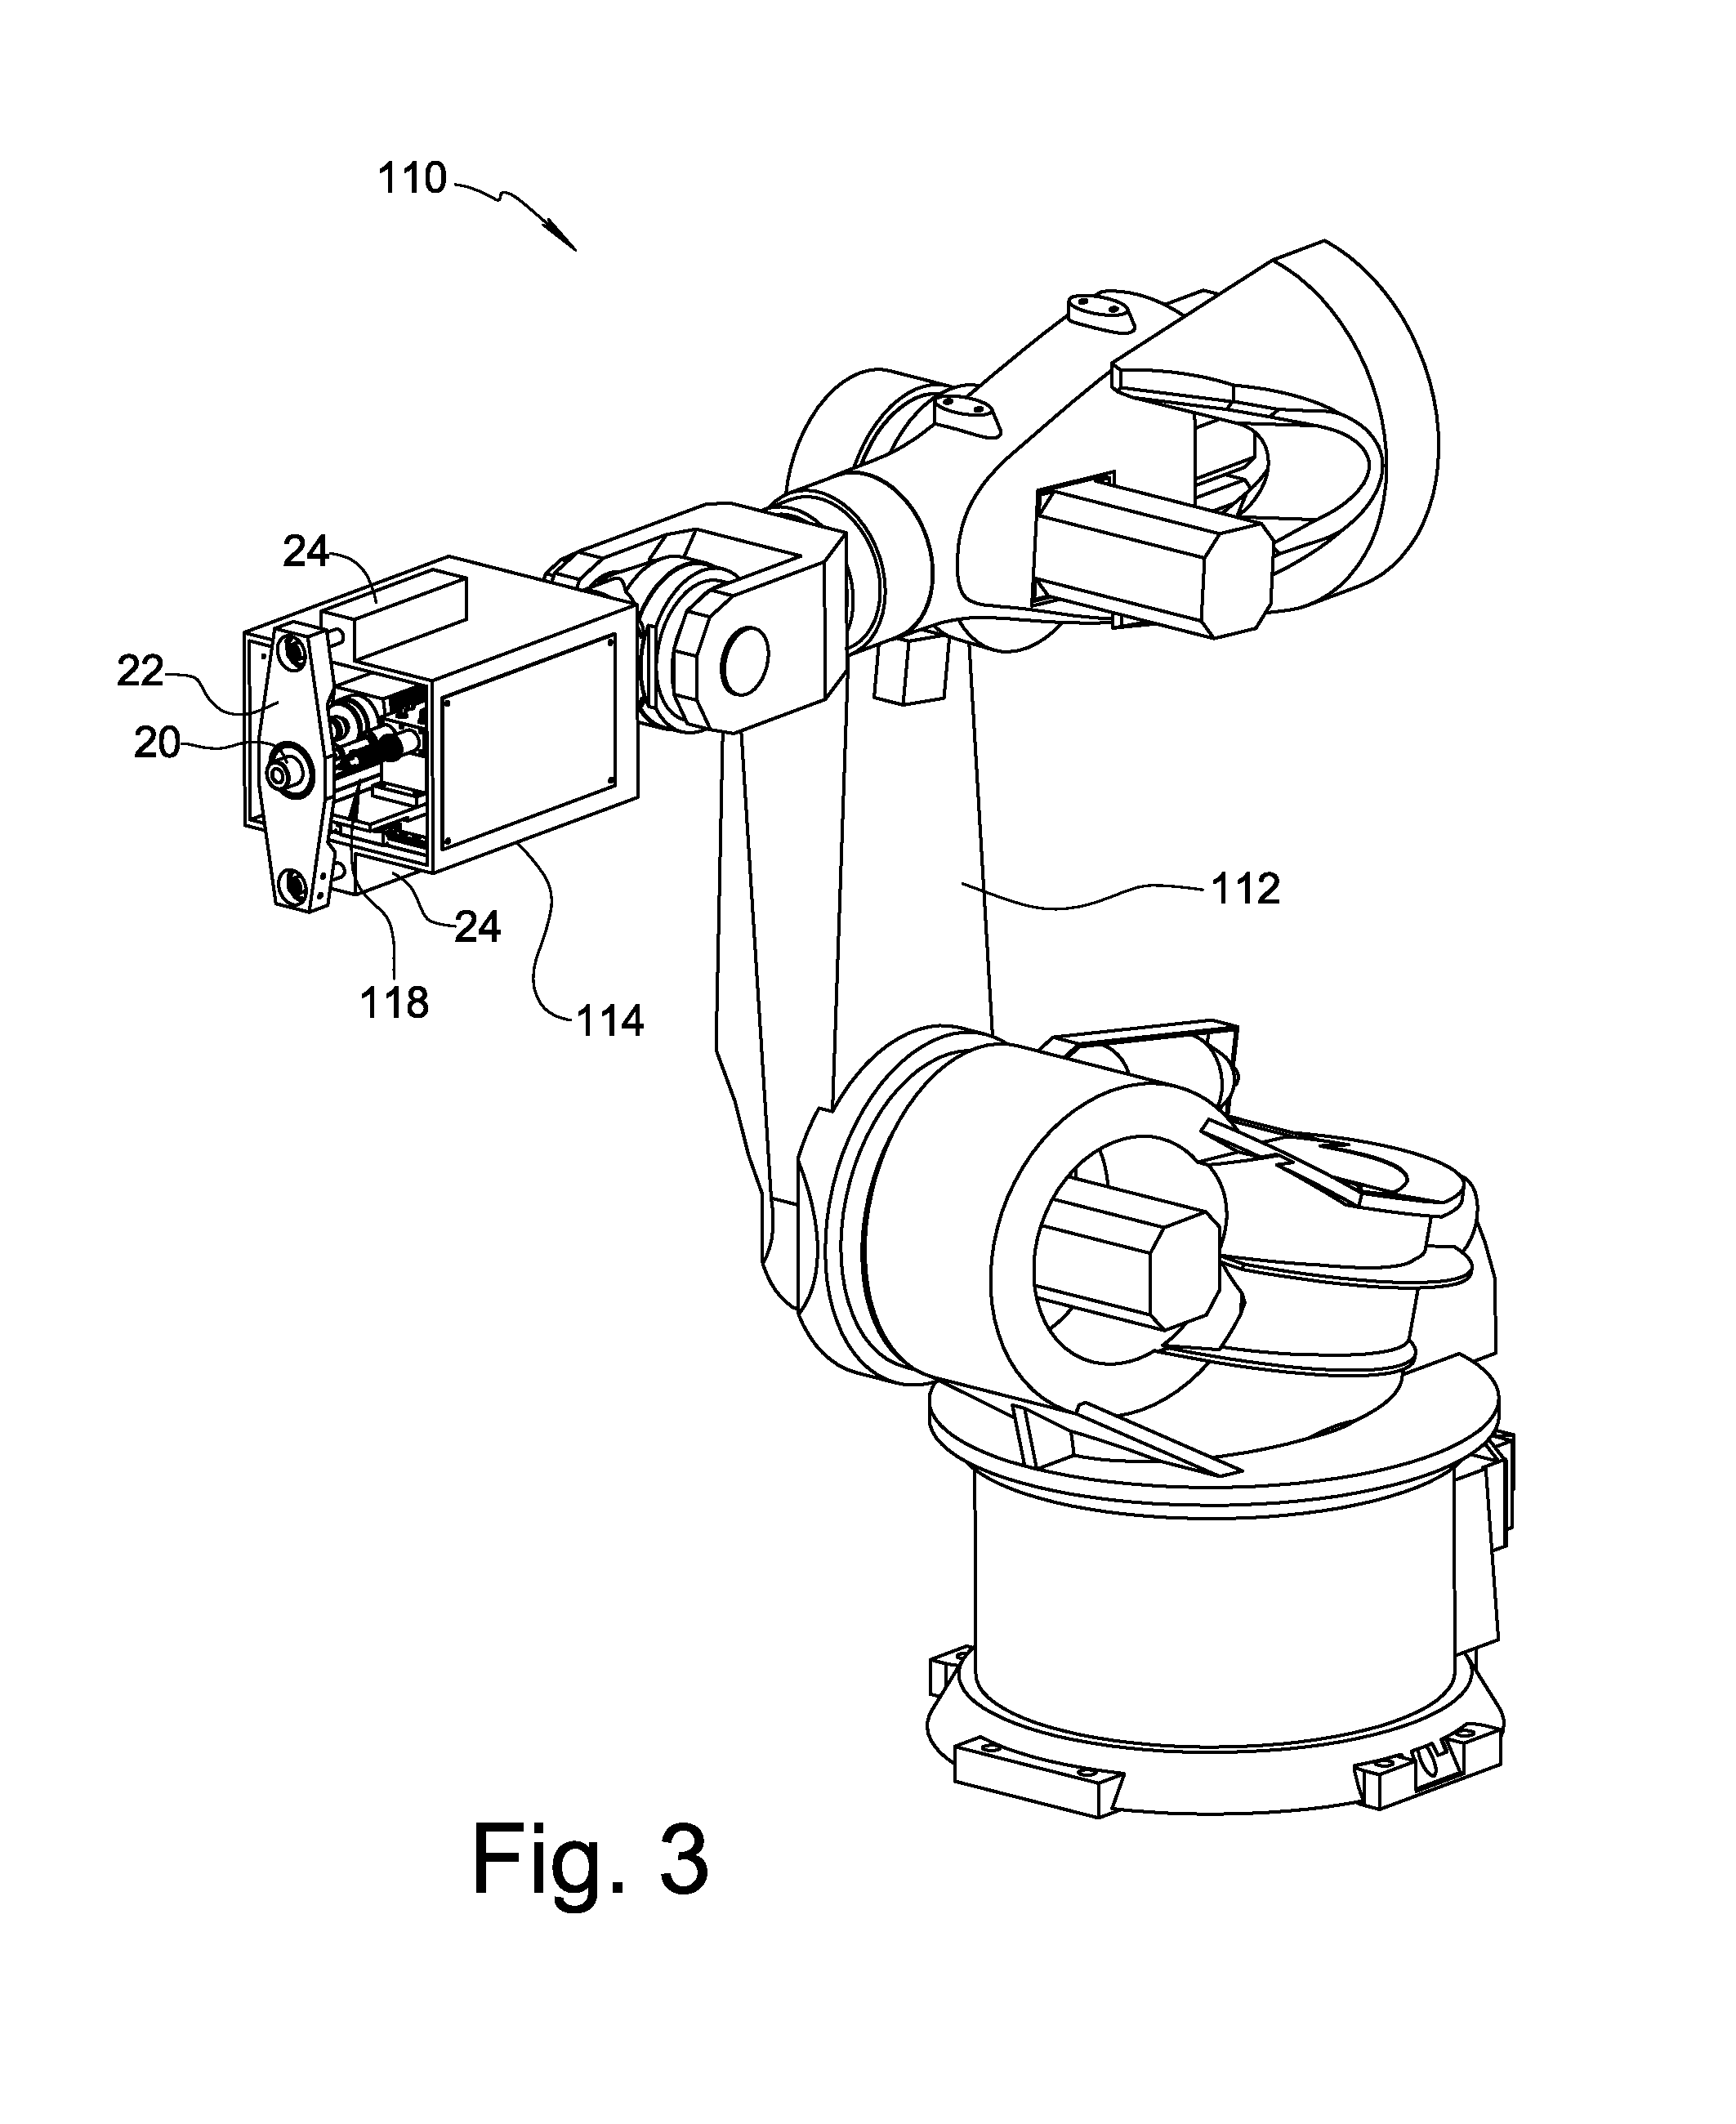 Apparatus and method for improving safety and quality of automatic riveting operations